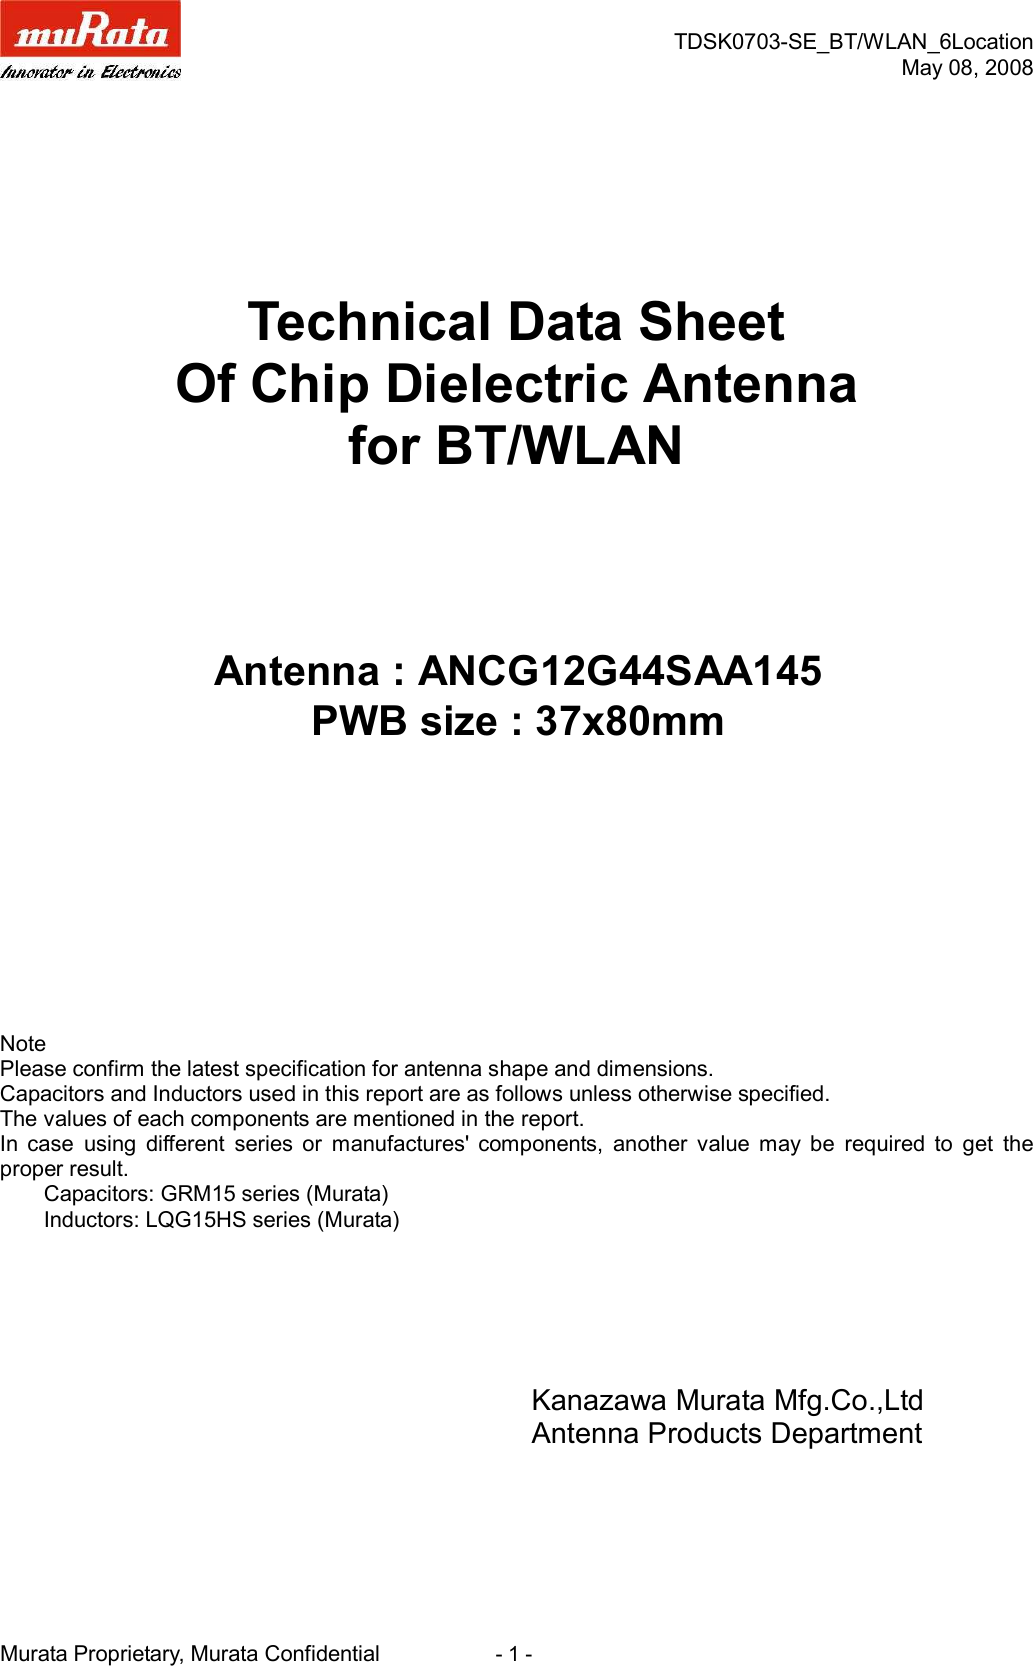 TDSK0703-SE_BT/WLAN_6LocationMay 08, 2008Murata Proprietary, Murata Confidential                      - 1 -Technical Data SheetOf Chip Dielectric Antennafor BT/WLANNotePlease confirm the latest specification for antenna shape and dimensions.Capacitors and Inductors used in this report are as follows unless otherwise specified.The values of each components are mentioned in the report.In  case  using  different  series  or  manufactures&apos;  components,  another  value  may  be  required  to  get  theproper result.        Capacitors: GRM15 series (Murata)        Inductors: LQG15HS series (Murata)Kanazawa Murata Mfg.Co.,LtdAntenna Products DepartmentAntenna : ANCG12G44SAA145PWB size : 37x80mm